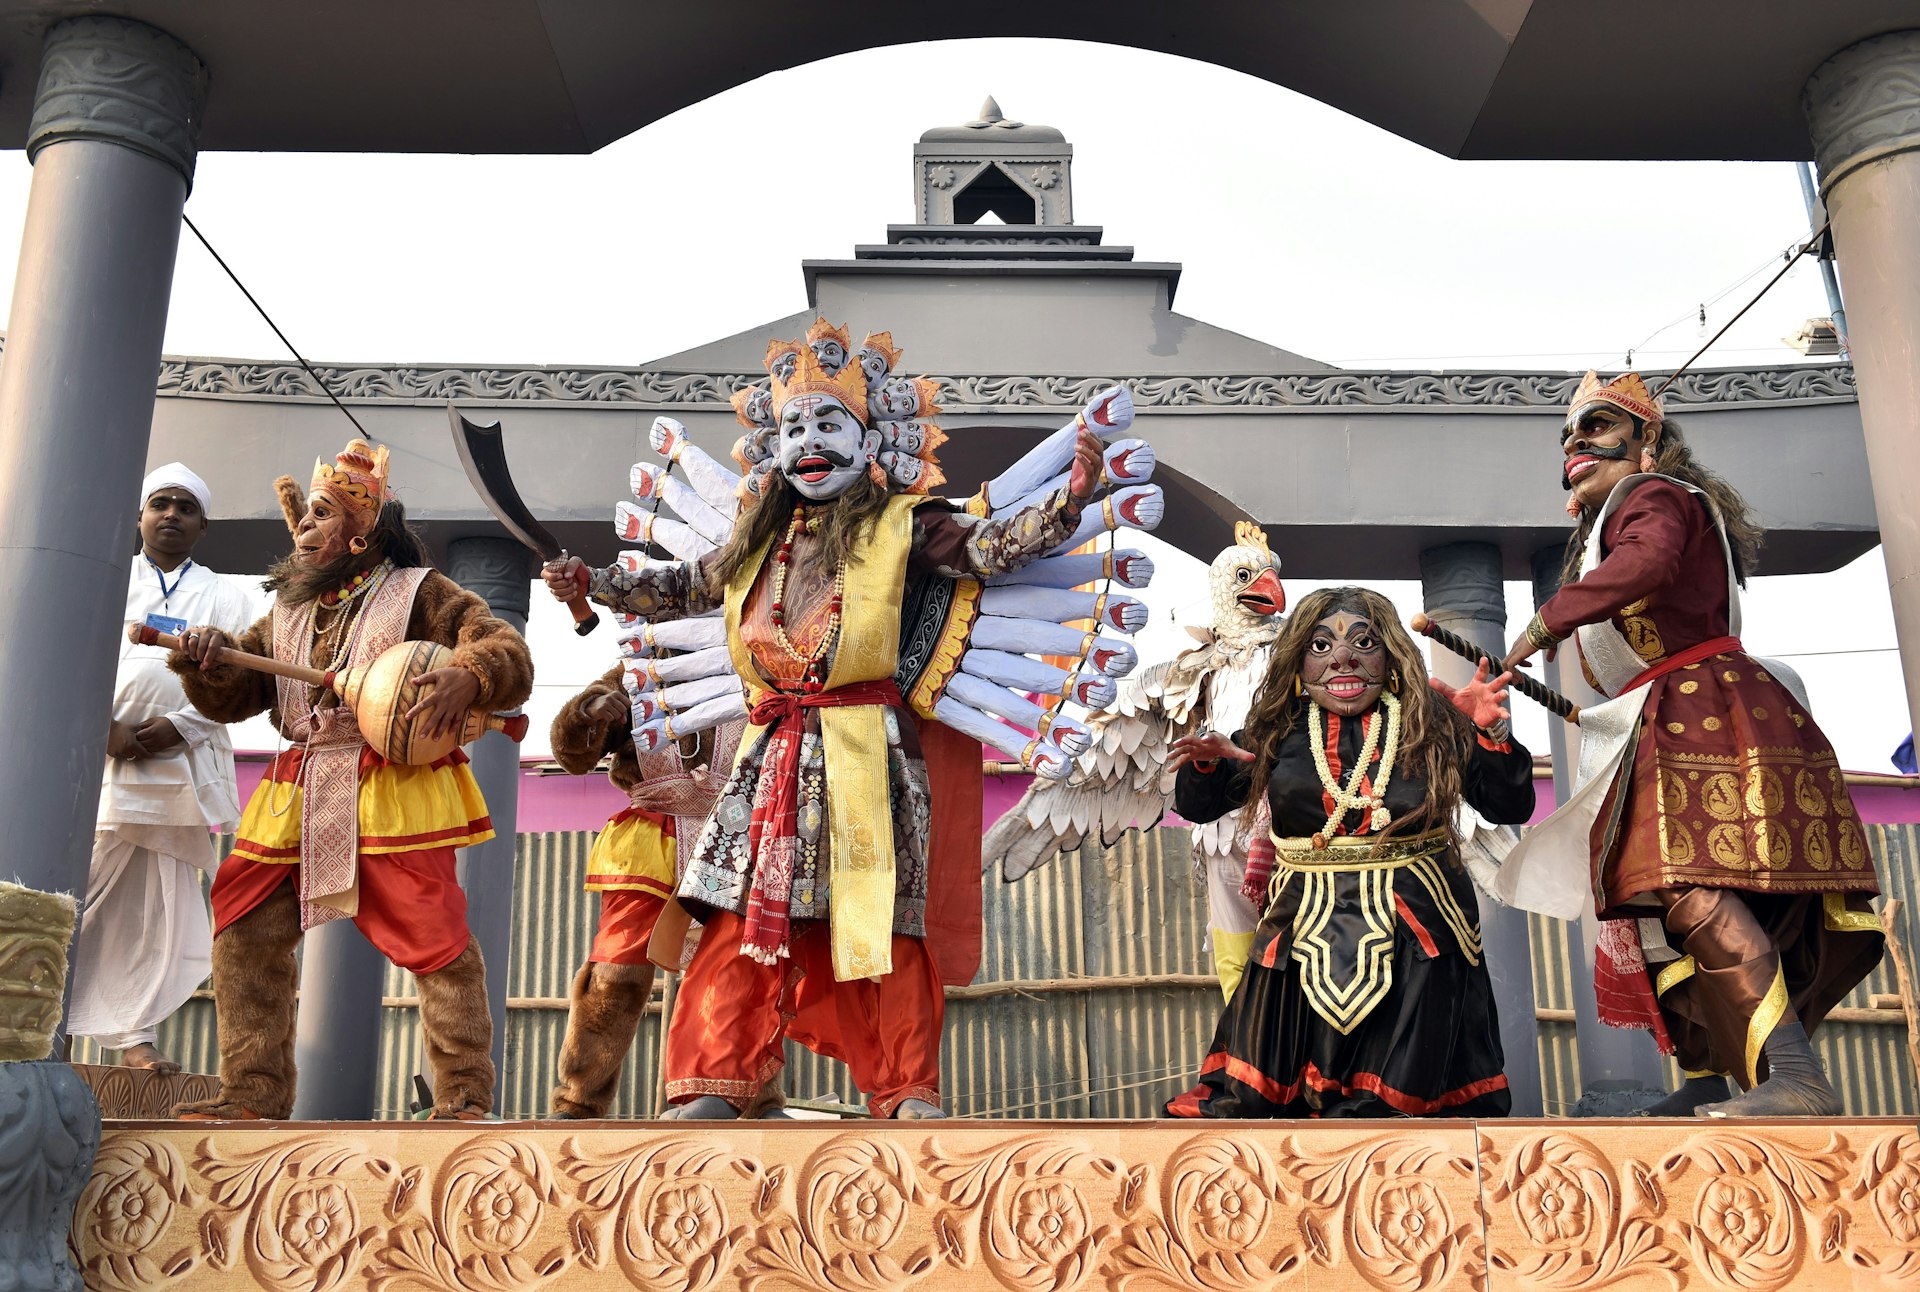 A group of people from Assam perform a traditional dance show wearing colourful masks and outfits resembling Hindu deities.